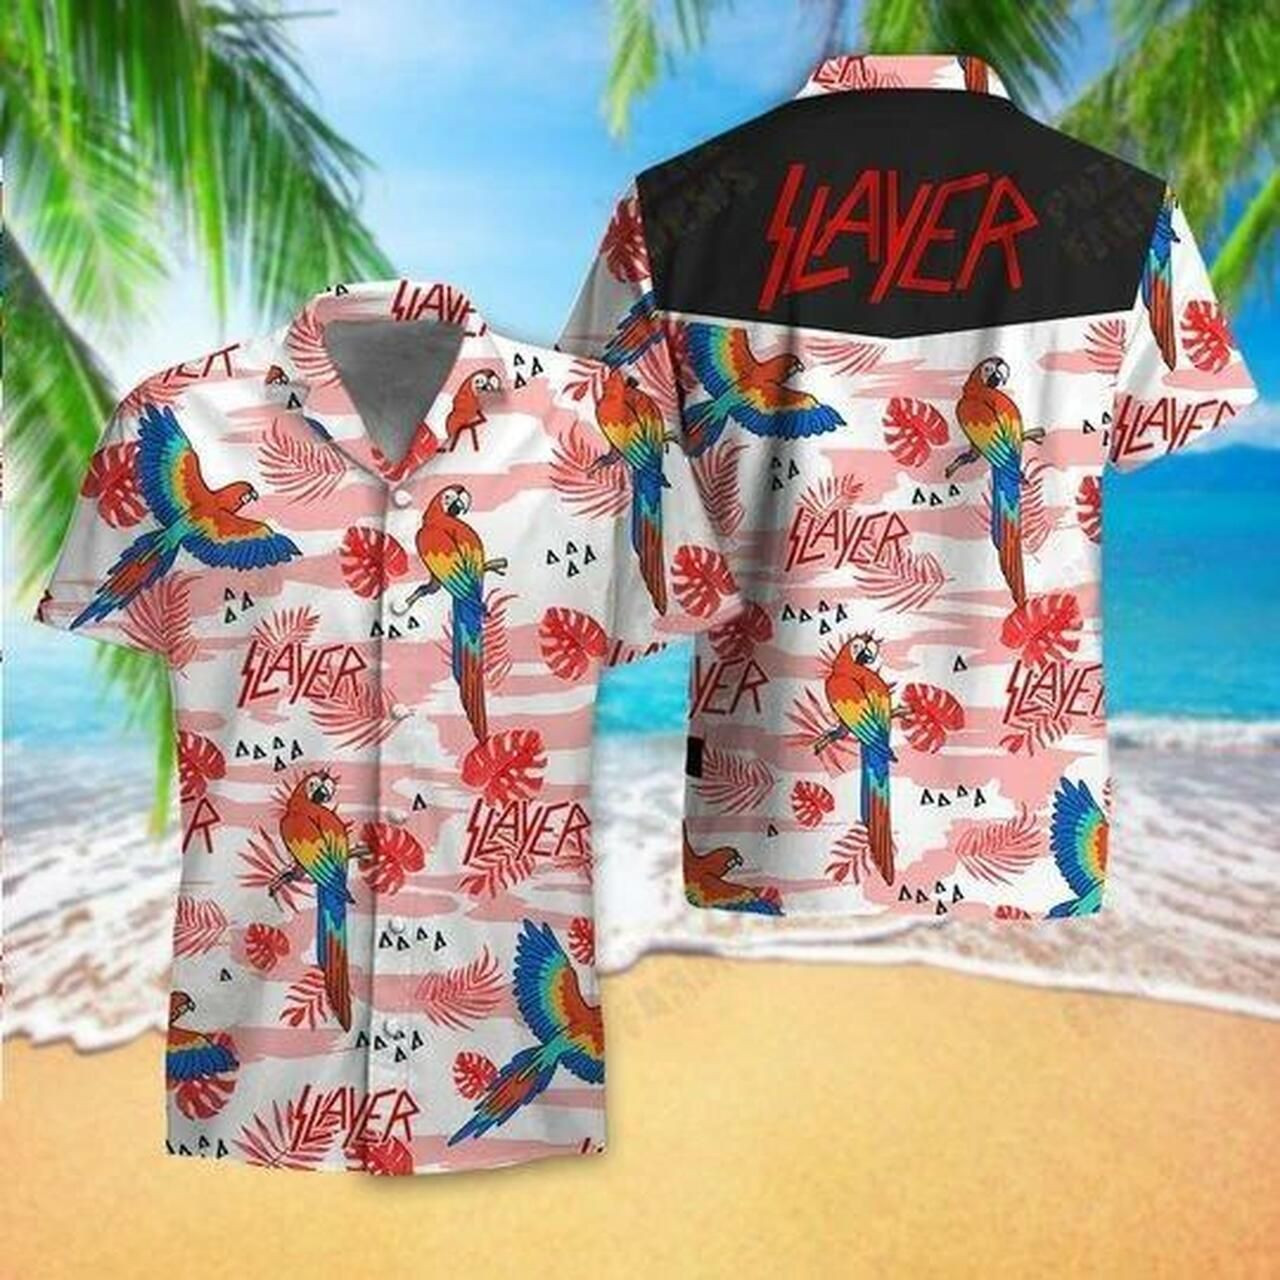 These Hawaiian shirt are an excellent choice for family outings 118